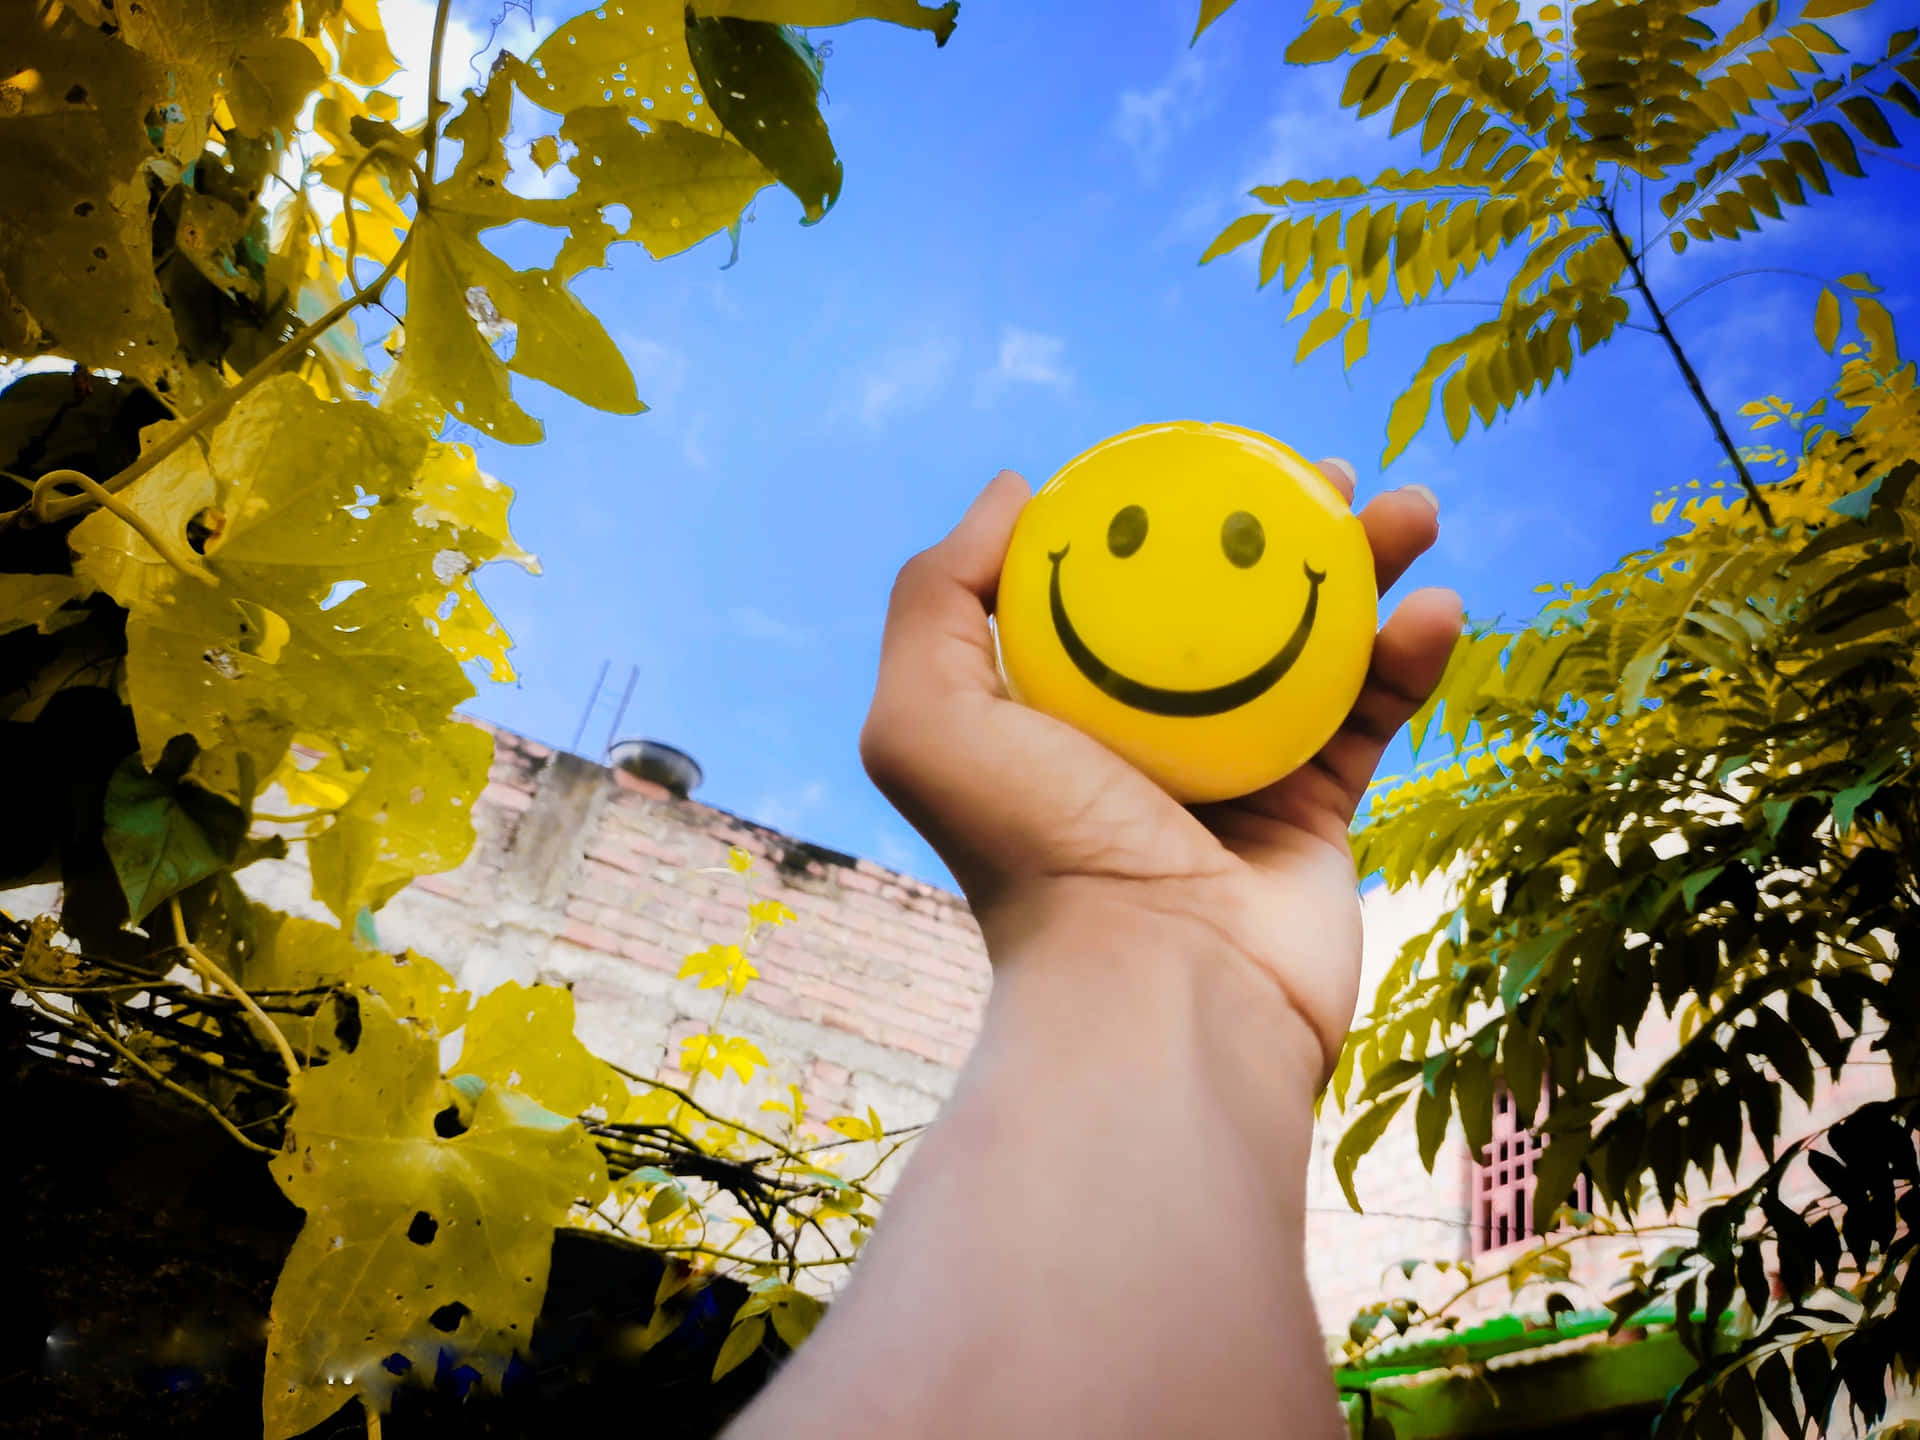 Spread happiness with a smile; Description: A bright, yellow smiley face on a black background; Related keywords: Cheerful, Positive, Smile, Friendly, Joyful, Happiness